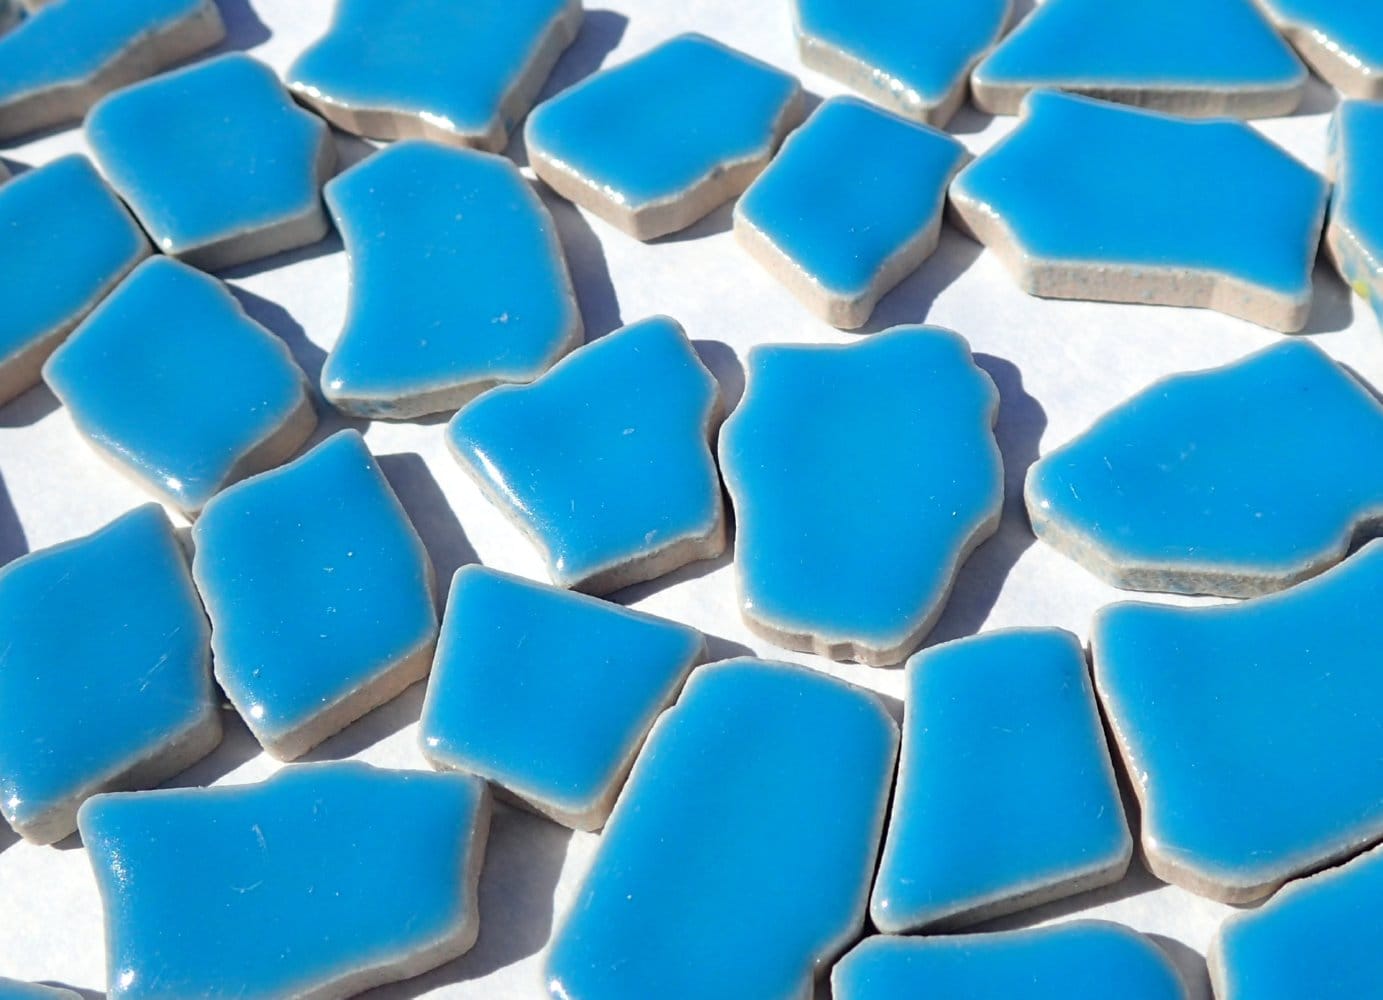 Mediterranean Blue Mosaic Ceramic Tiles - Jigsaw Puzzle Shaped Pieces - Half Pound - Assorted Sizes Random Shapes in Thalo Blue